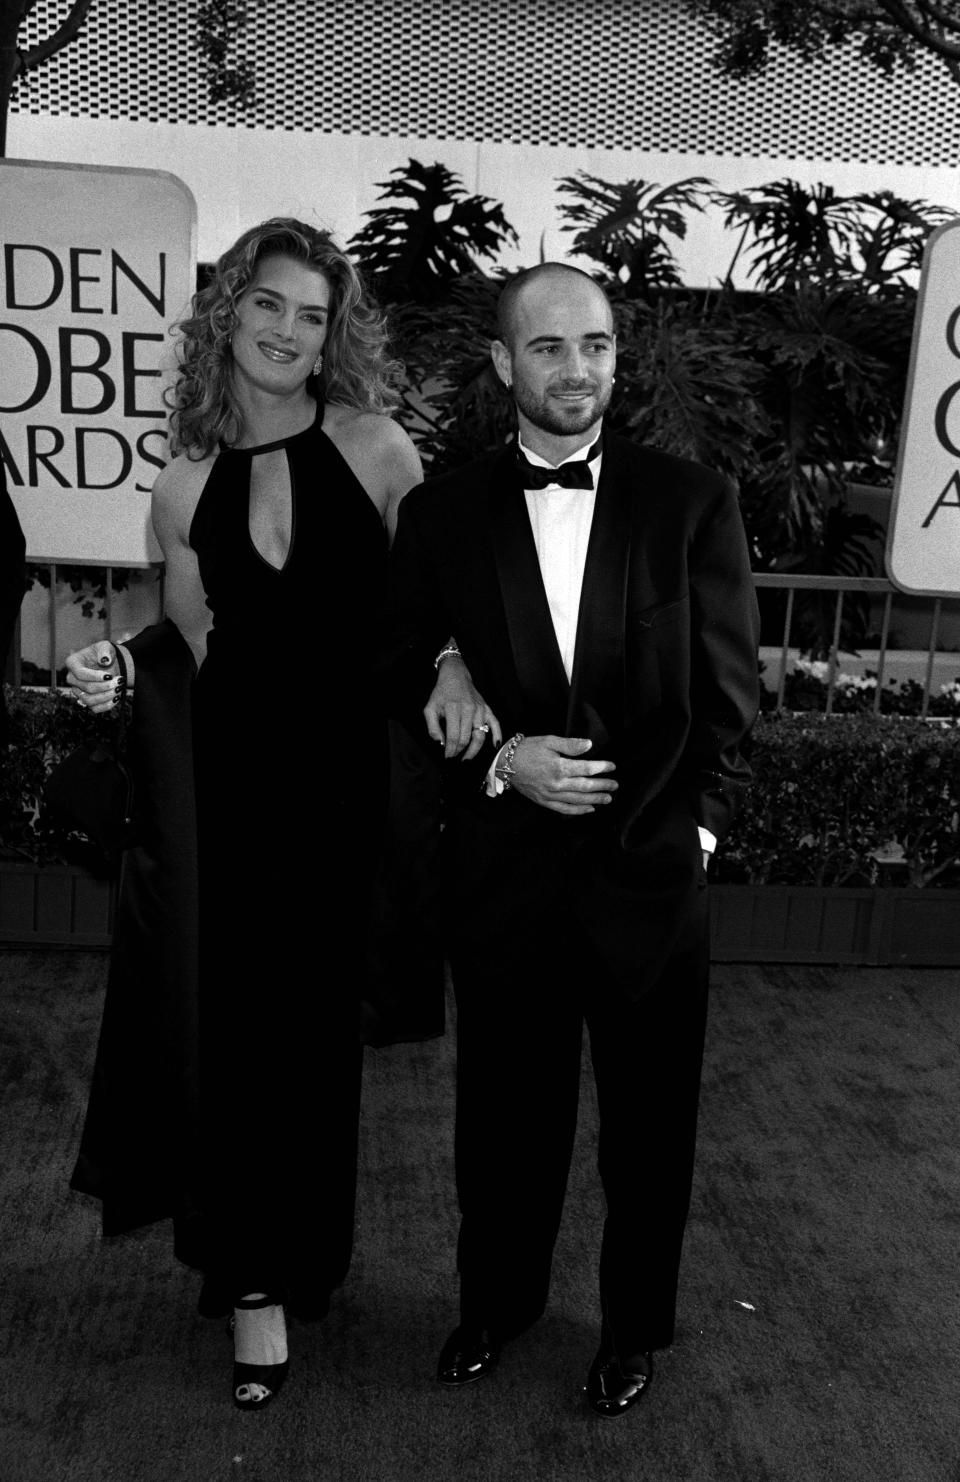 Brooke Shields and Andre Agassi attend the 54th Golden Globe Awards at the Beverly Hilton Hotel in Beverly Hills, California, on January 19, 1997. (Photo by Donato Sardella/Penske Media via Getty Images)